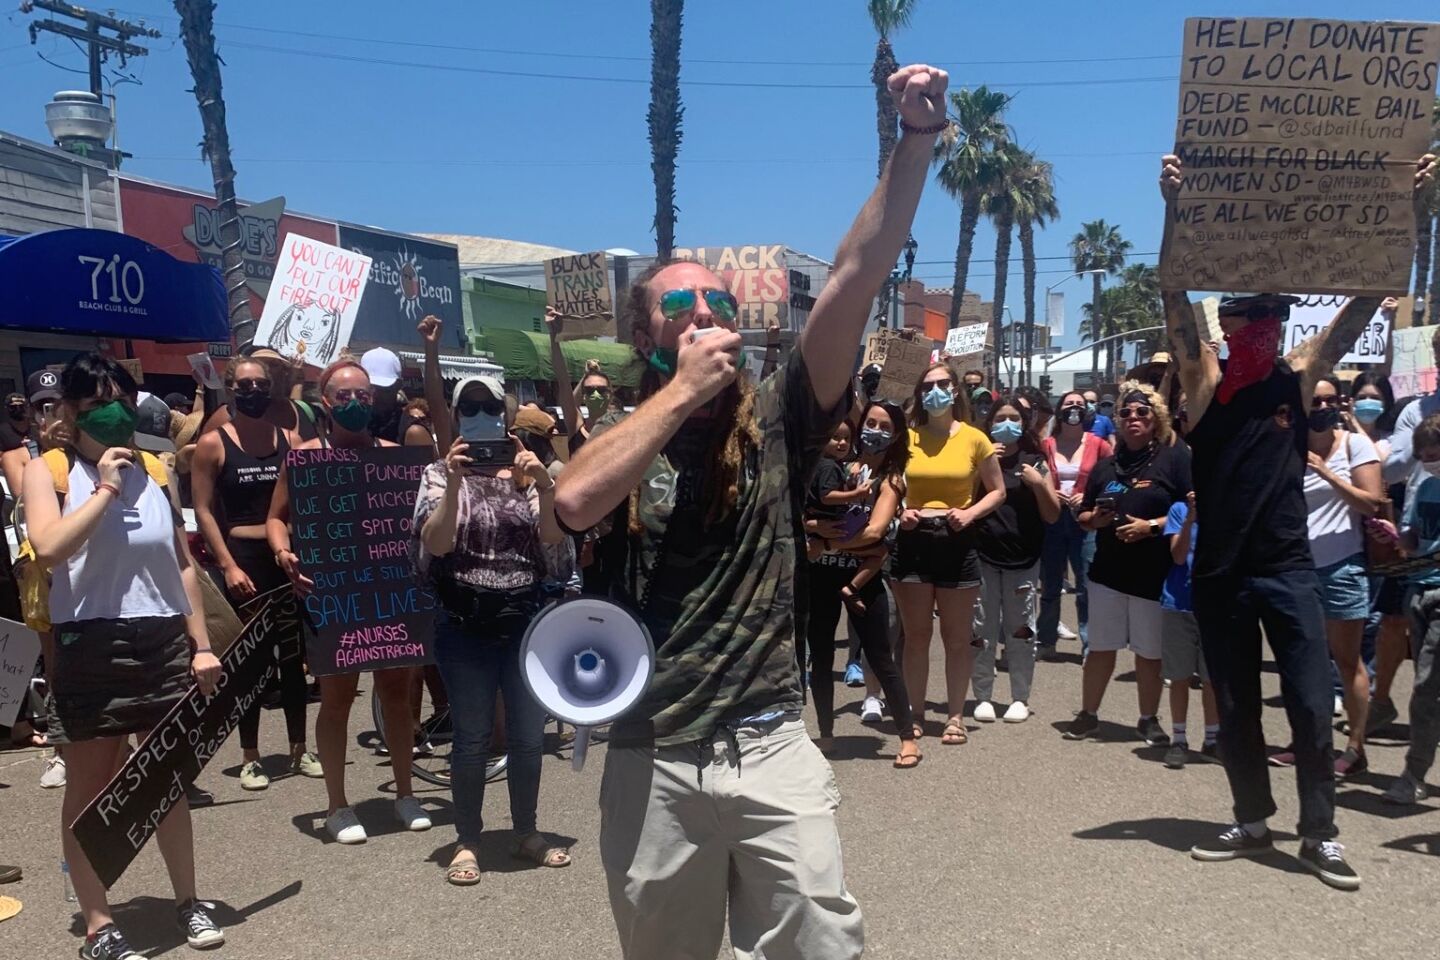 Pacific Beach Walk for Equality organizer Kai Phillips makes a statement in support of Black Lives Matter at the start of the protest June 14.